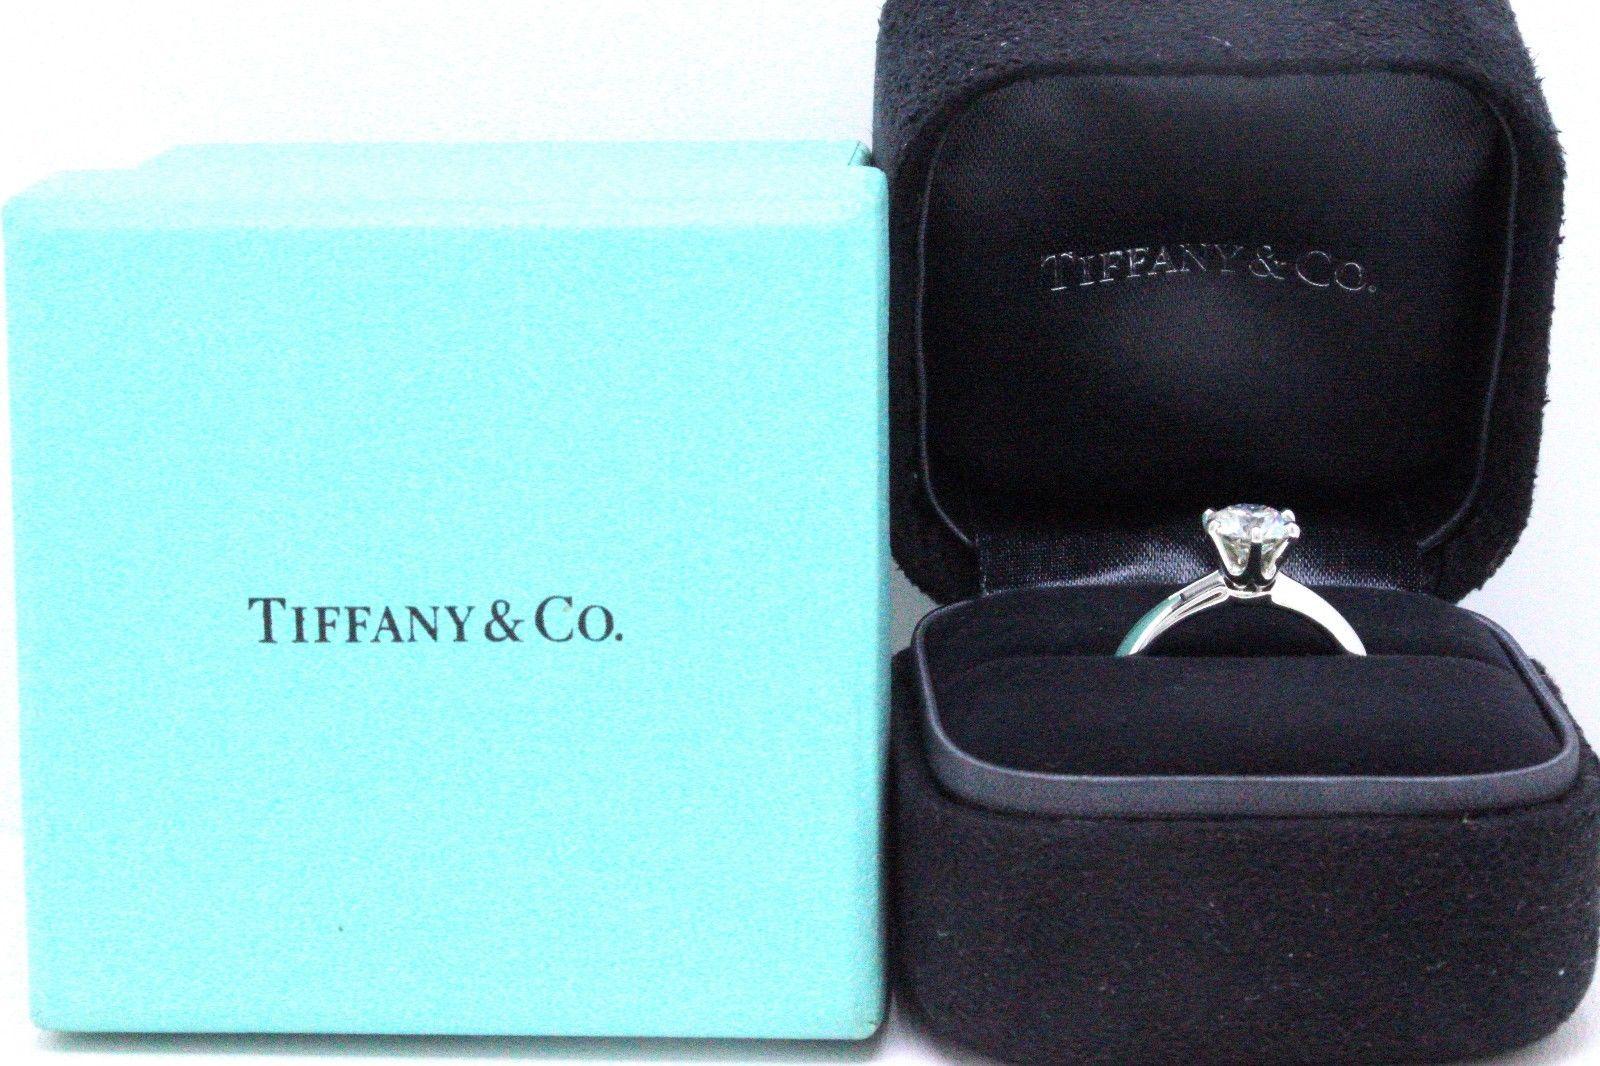 Tiffany & Co.

Style:  Solitaire Diamond Engagement Ring
Serial Number:  G11140039 / 21487848
Metal:  Platinum PT 950
Size:  5.5 - Sizable
Total Carat Weight:  1.07 CTS
Diamond Shape:  Round Brilliant
Diamond Color & Clarity:  F / VS1
Hallmark: 